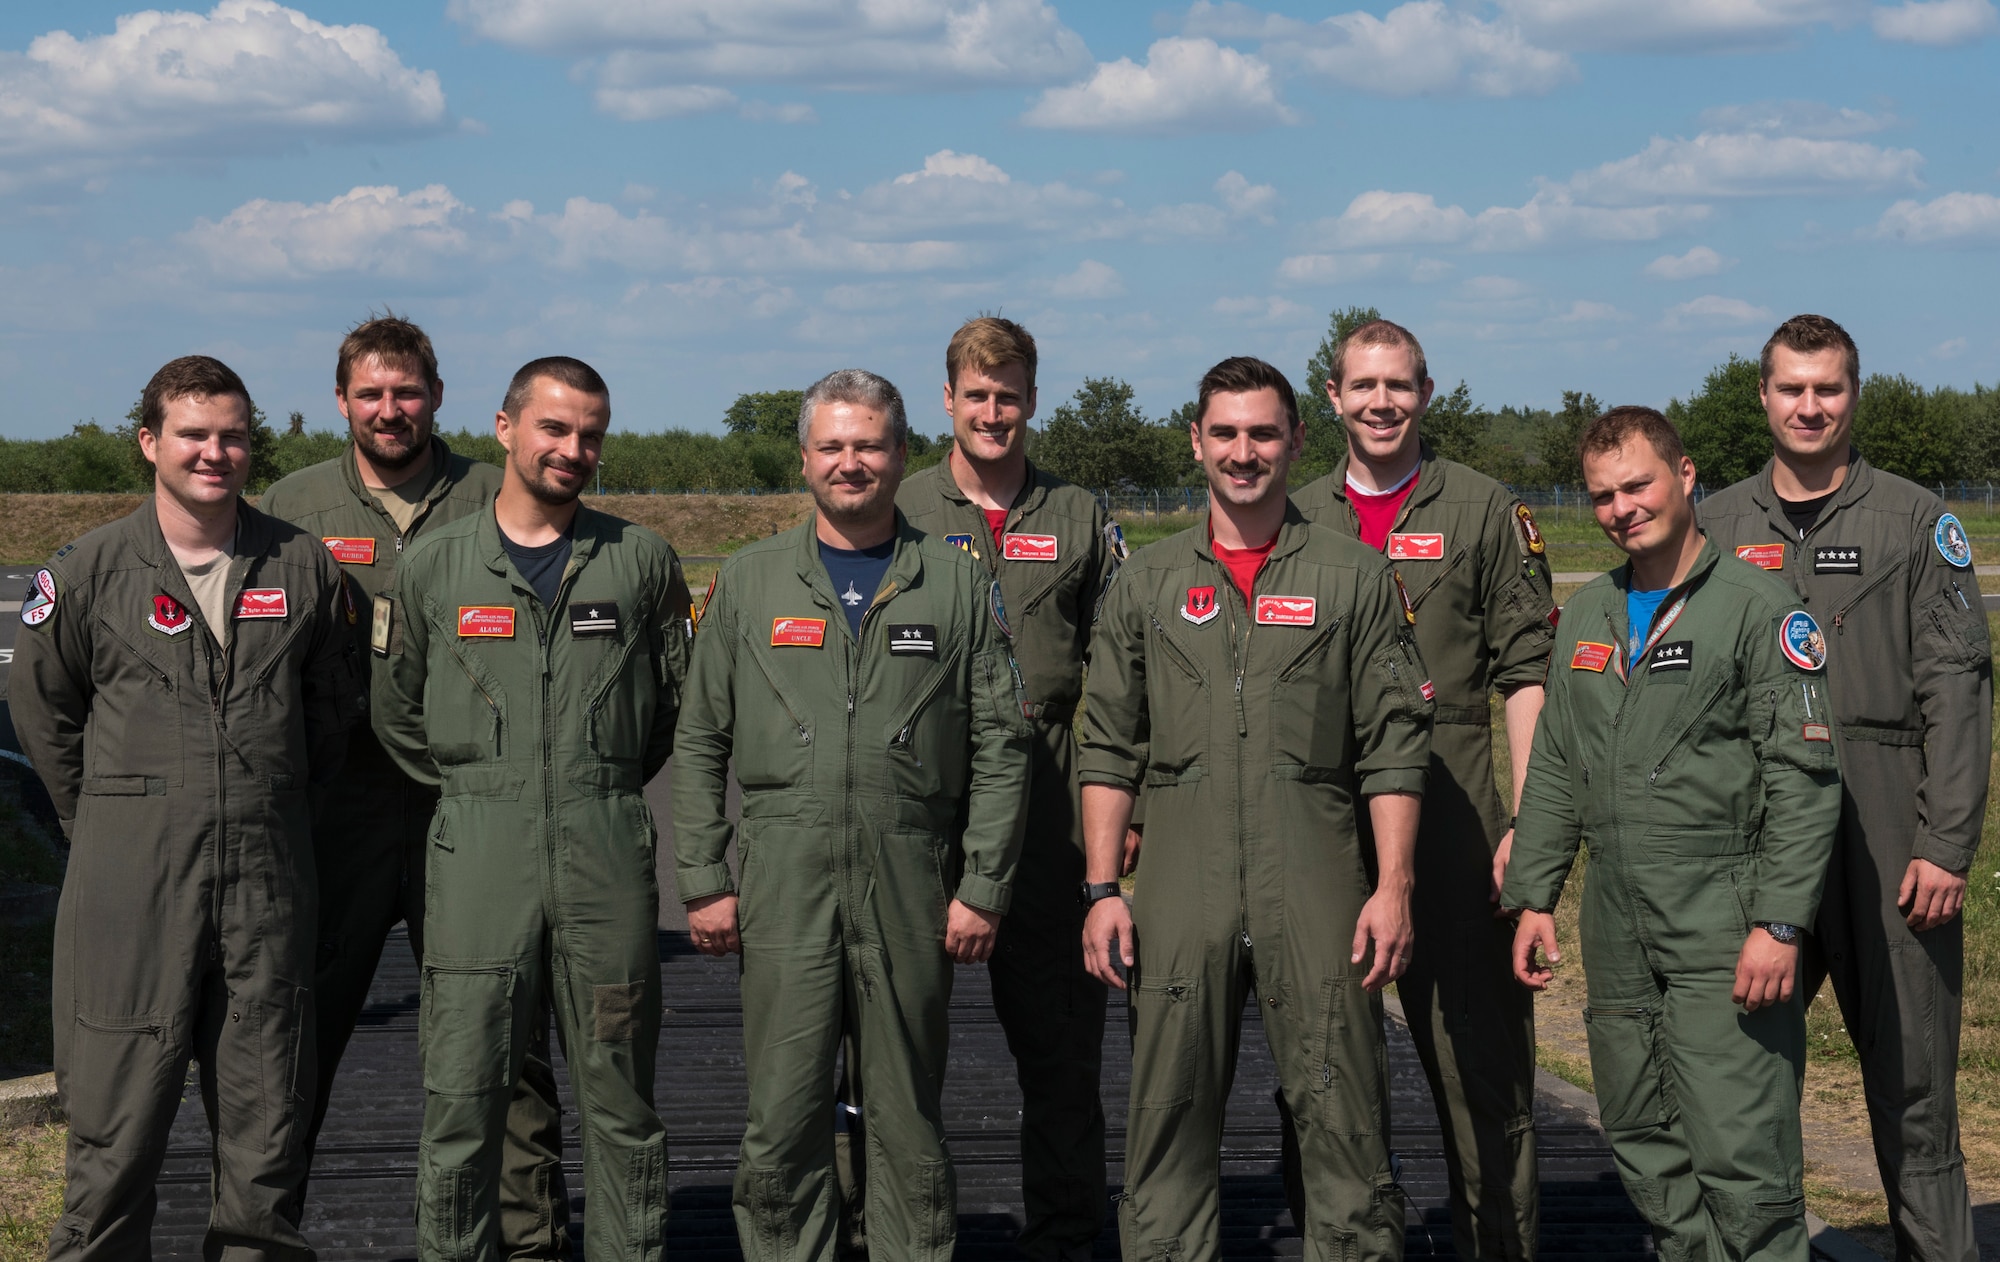 U.S. Air Force and Polish air force F-16 pilots gather for a group photo at Lask Air Base, Poland, August 15, 2020. The pilots flew over Warsaw, Poland to support Polish Armed Forces Day, a celebration of the 100th Anniversary of Poland's victory during the Polish-Soviet War. (U.S. Air Force photo by Senior Airman Chanceler Nardone)